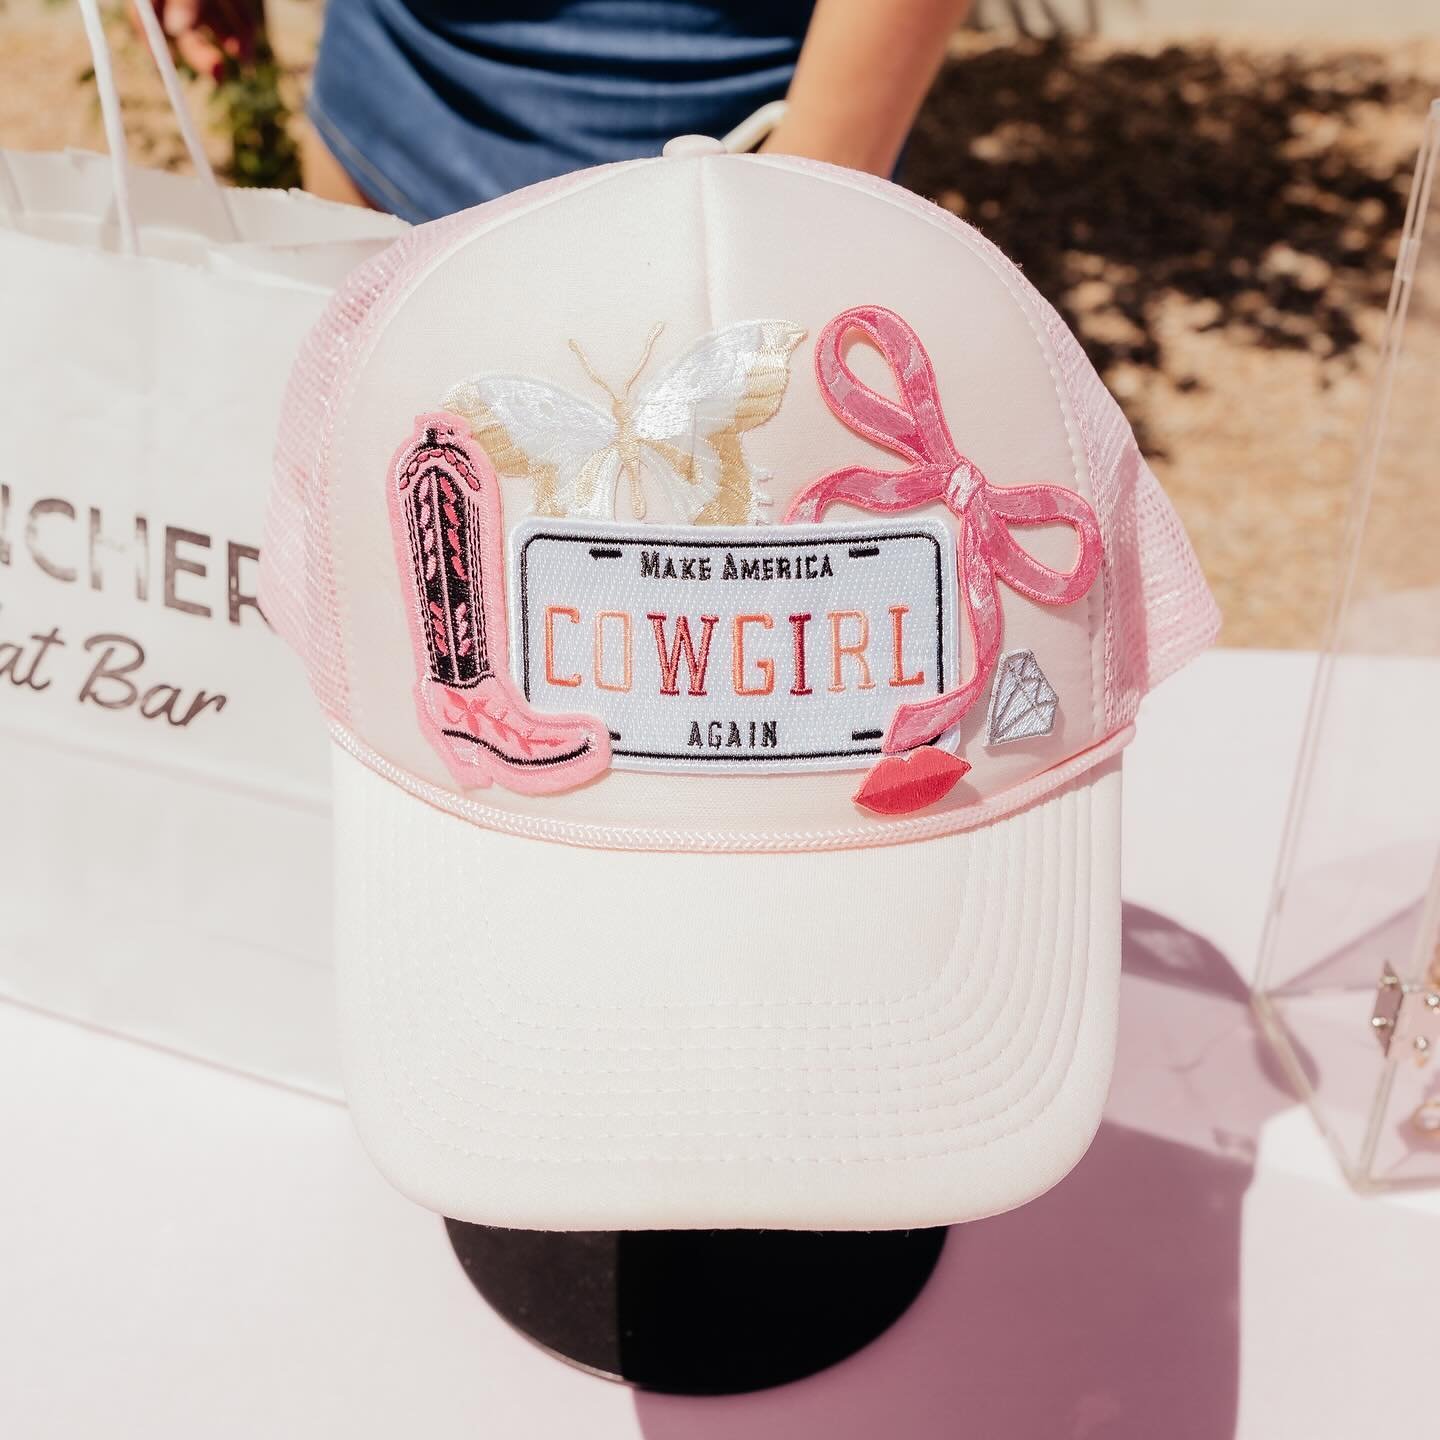 Who said trucker hats can&rsquo;t be glam?! 👄🩷

@rancherhatbar is Scottsdale&rsquo;s premier custom hat personalization experience that&rsquo;s tailored to your style whether you&rsquo;re looking for a rancher, cowboy or trucker hat ✨ It&rsquo;s no